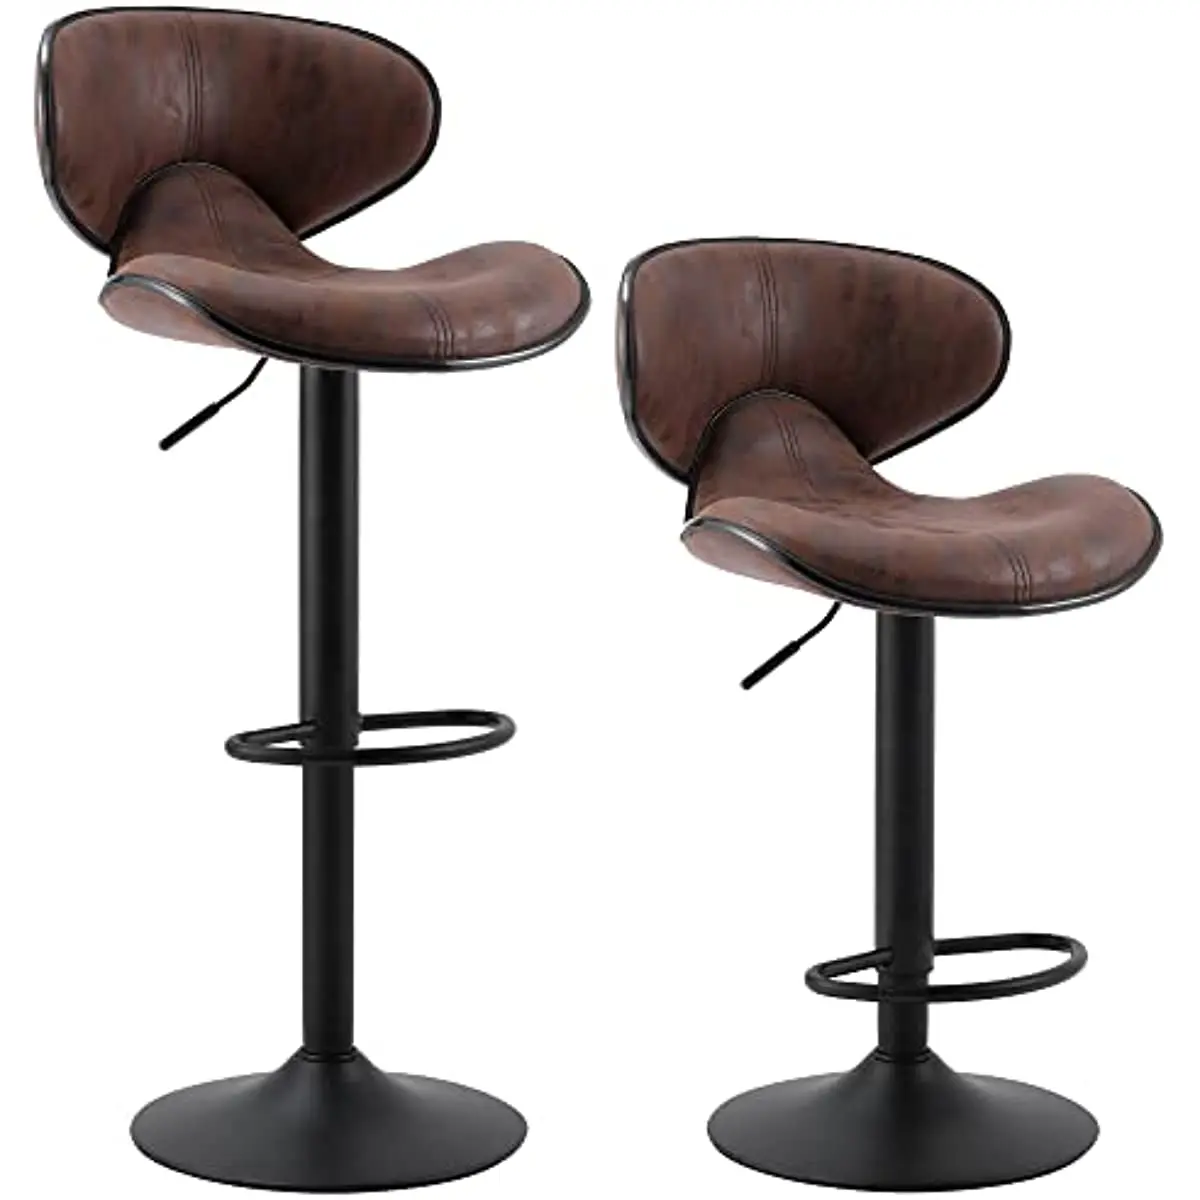 

Swivel Tall Kitchen Counter Island Dining Chair with Backs, 24” Armless Modern Bar Stool Chairs fit Counter Island